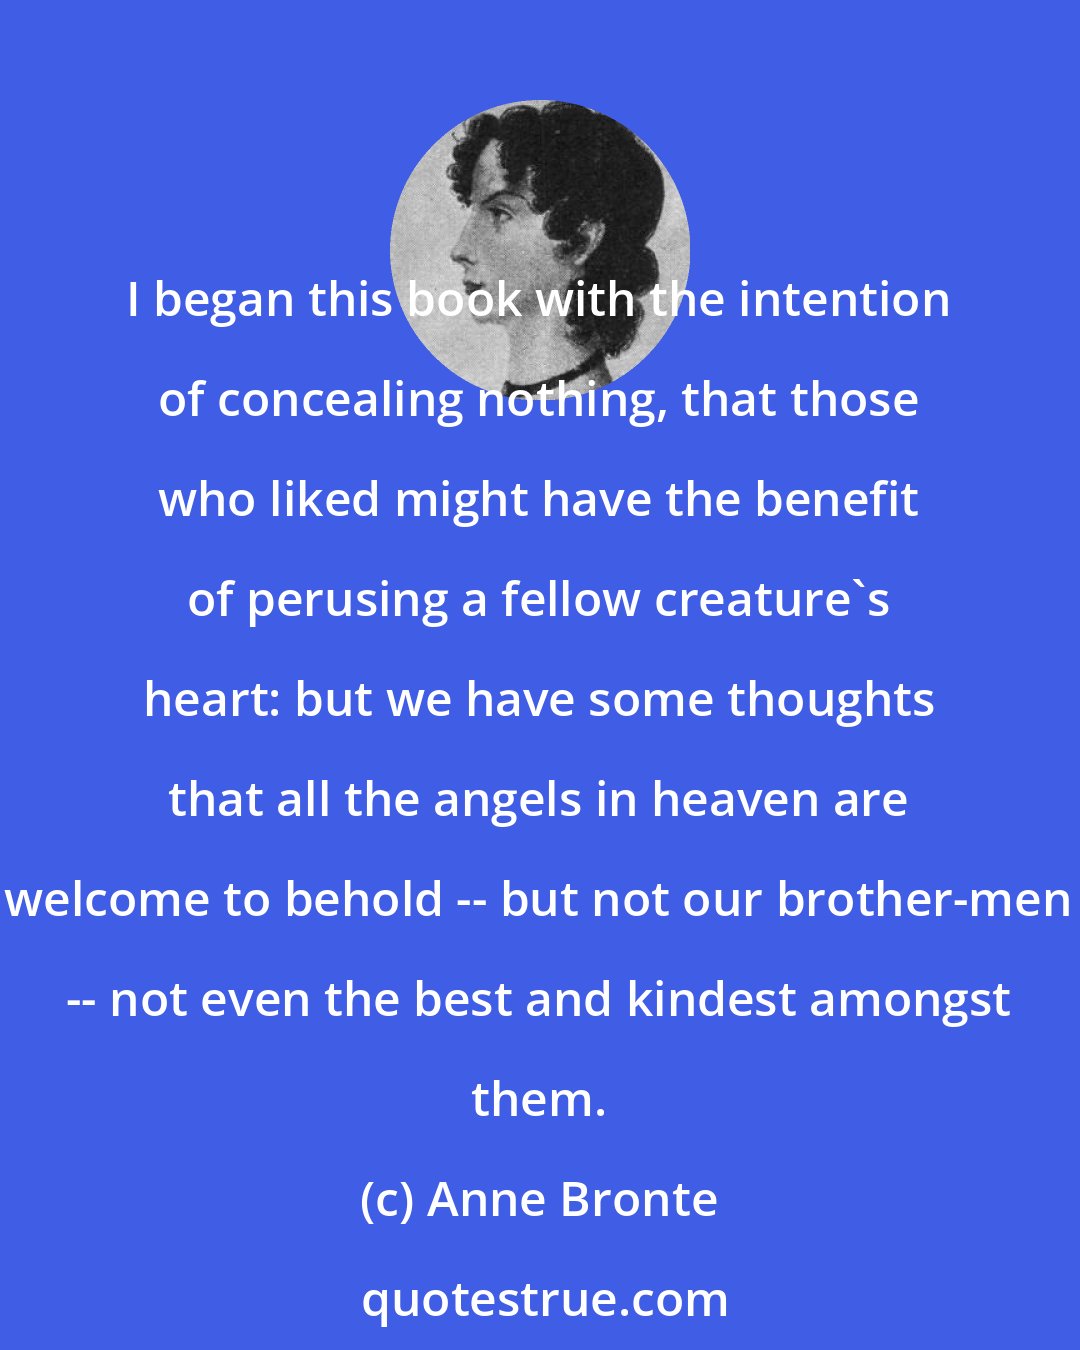 Anne Bronte: I began this book with the intention of concealing nothing, that those who liked might have the benefit of perusing a fellow creature's heart: but we have some thoughts that all the angels in heaven are welcome to behold -- but not our brother-men -- not even the best and kindest amongst them.